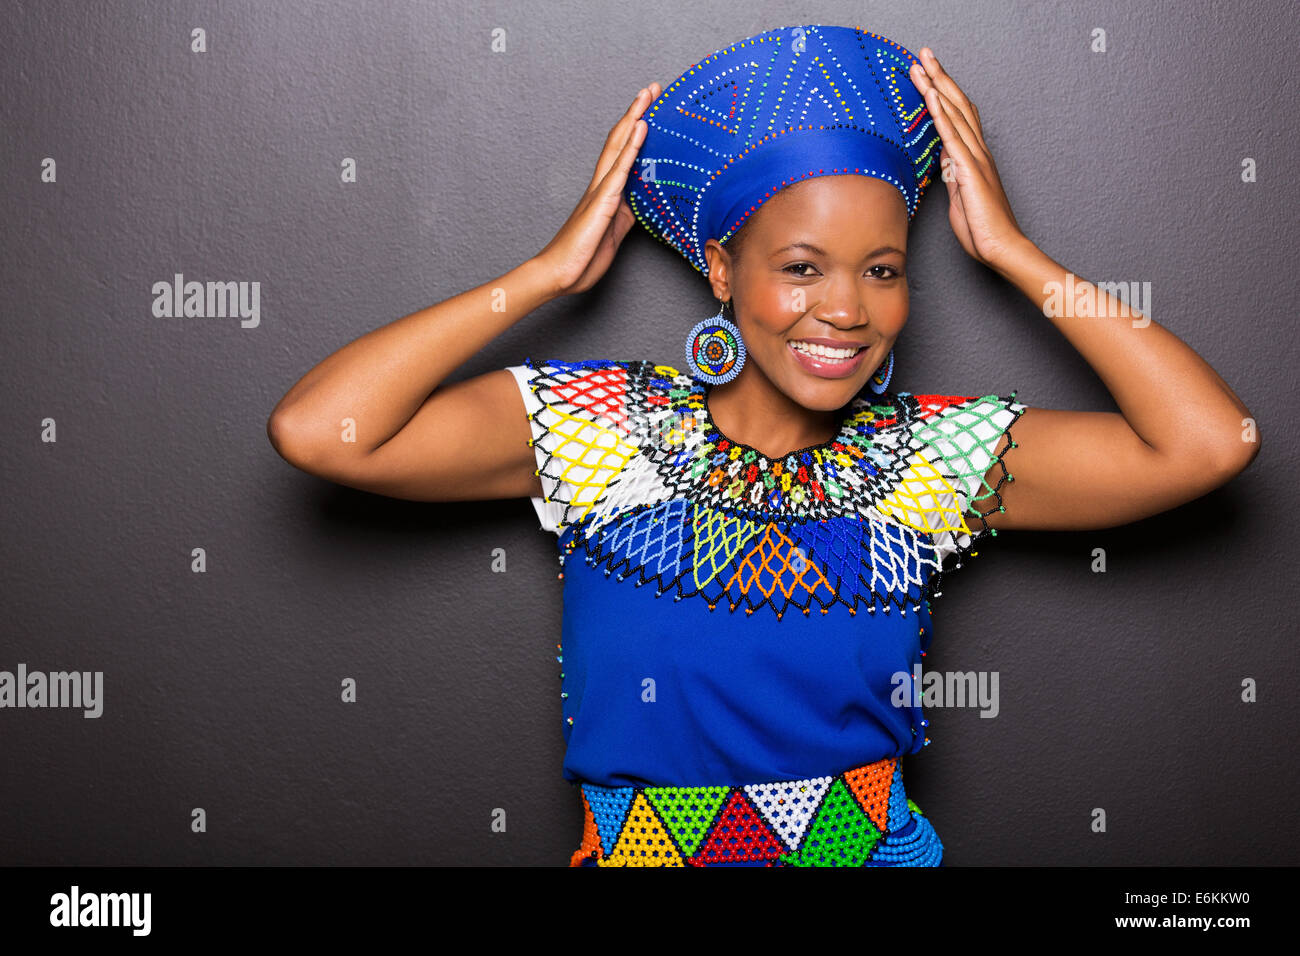 beautiful African model in traditional attire posing on black background Stock Photo